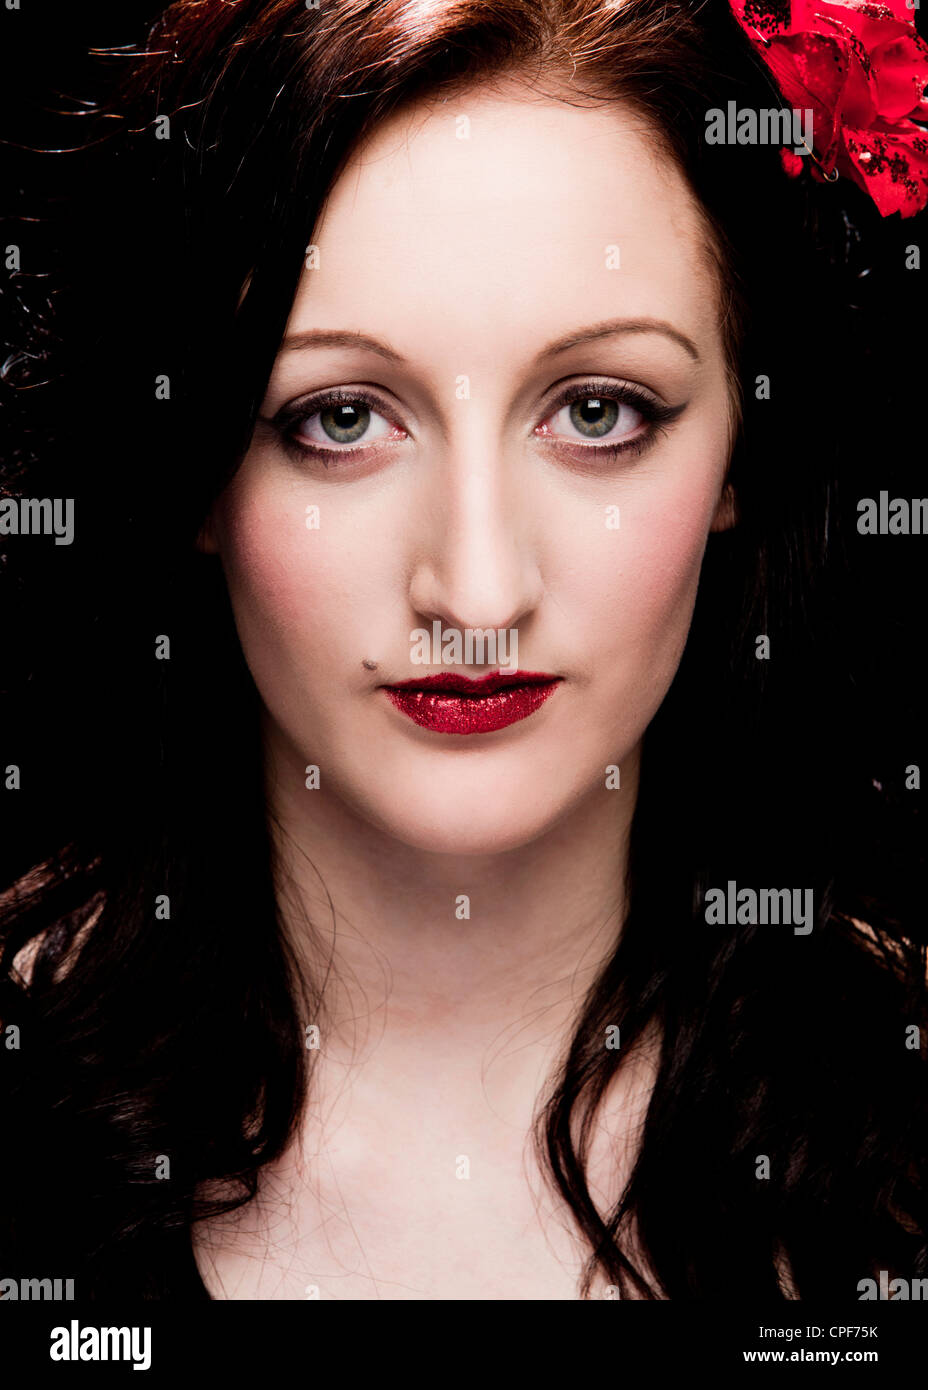 Head shot colour studio portrait of female model wearing a black dress and red lipstick looking directly into the camera Stock Photo